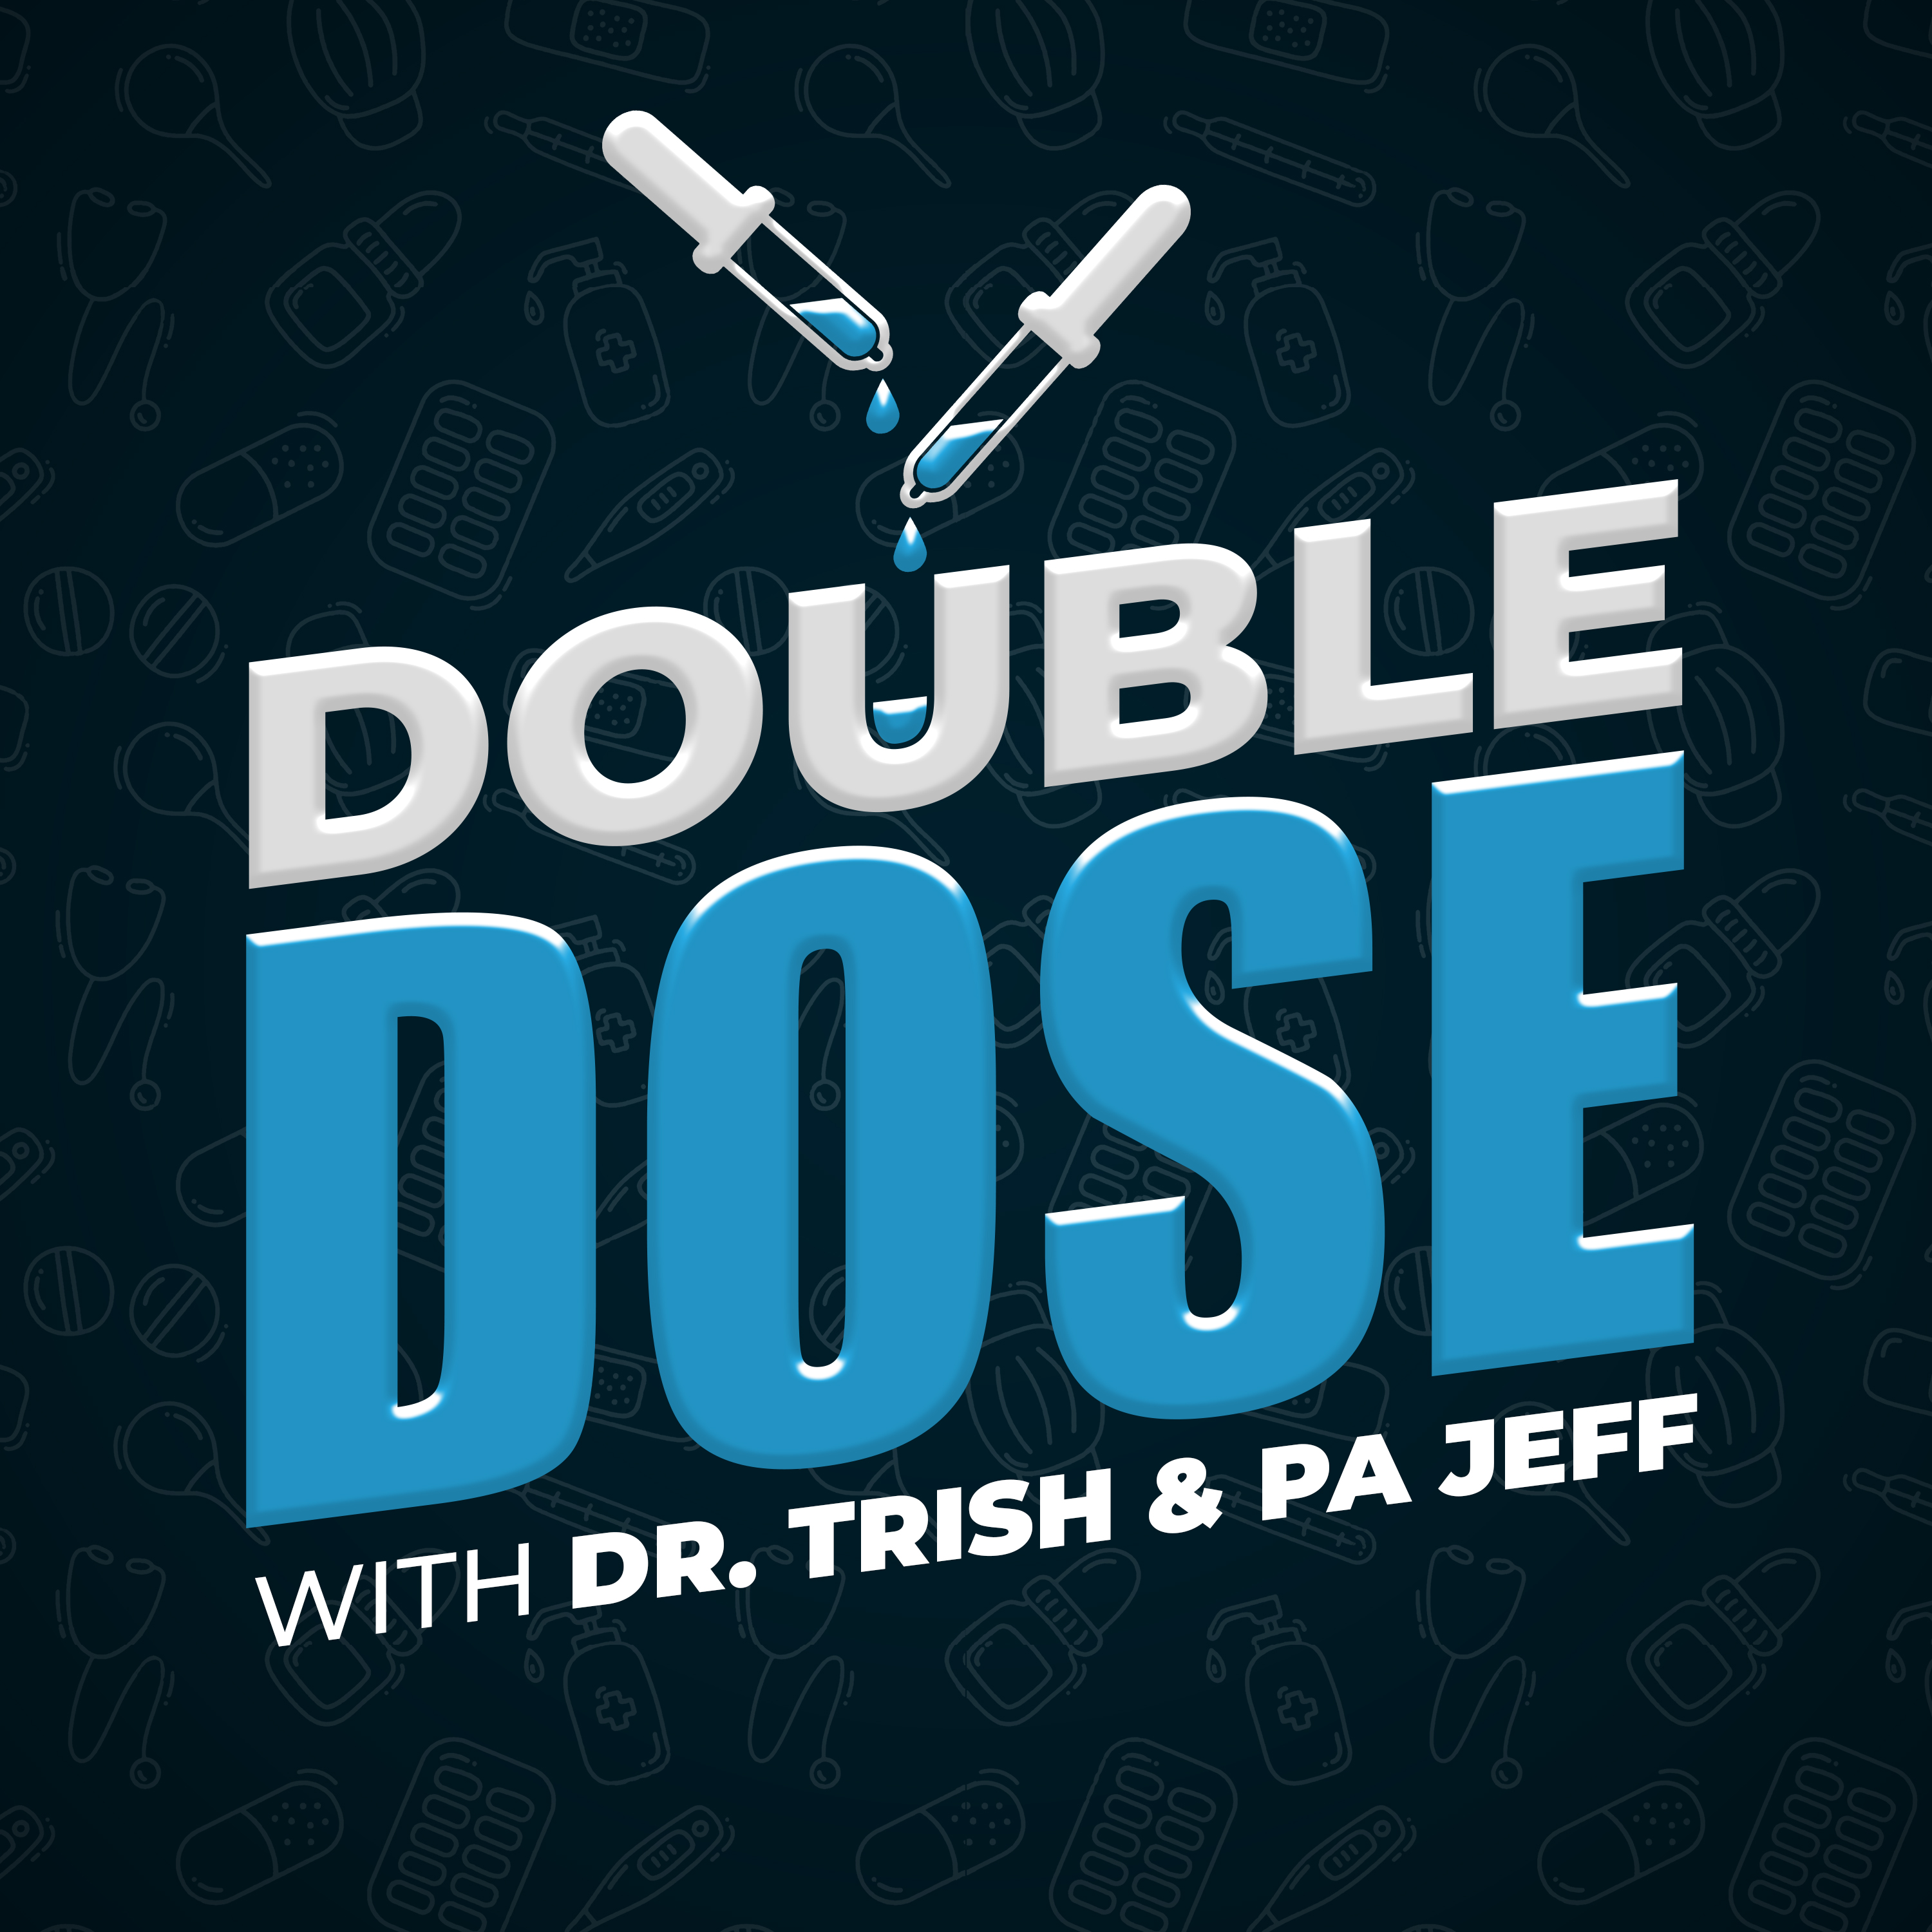 Artwork for podcast Double Dose: with Dr. Trish & PA Jeff